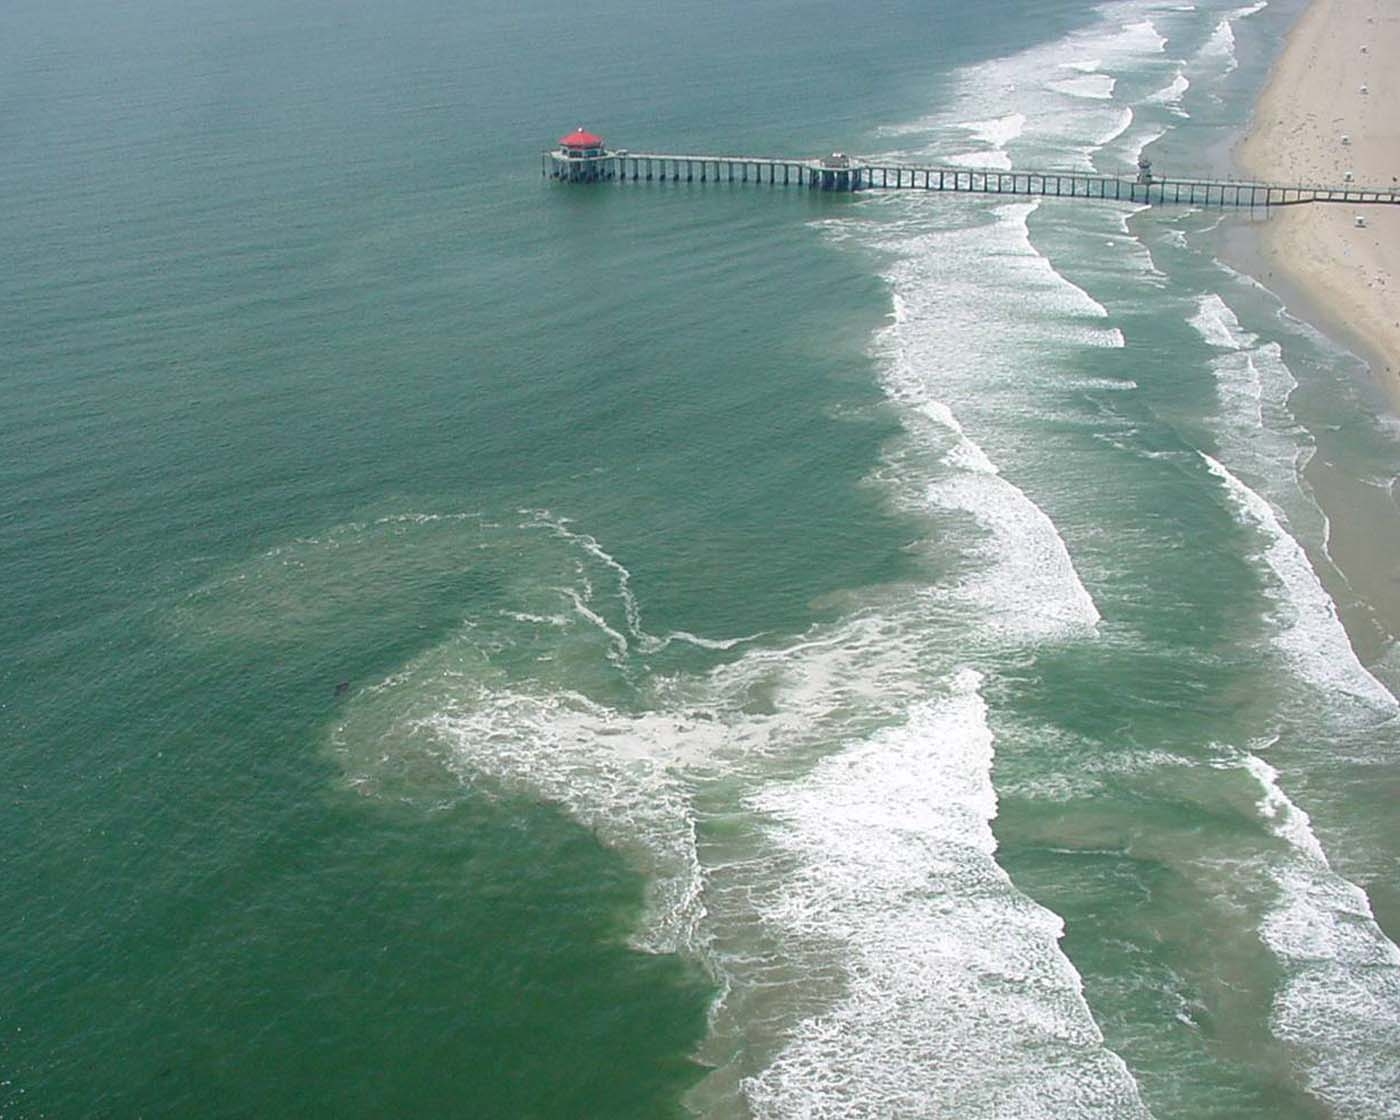 Image showing rip currents influenced by a near-structure